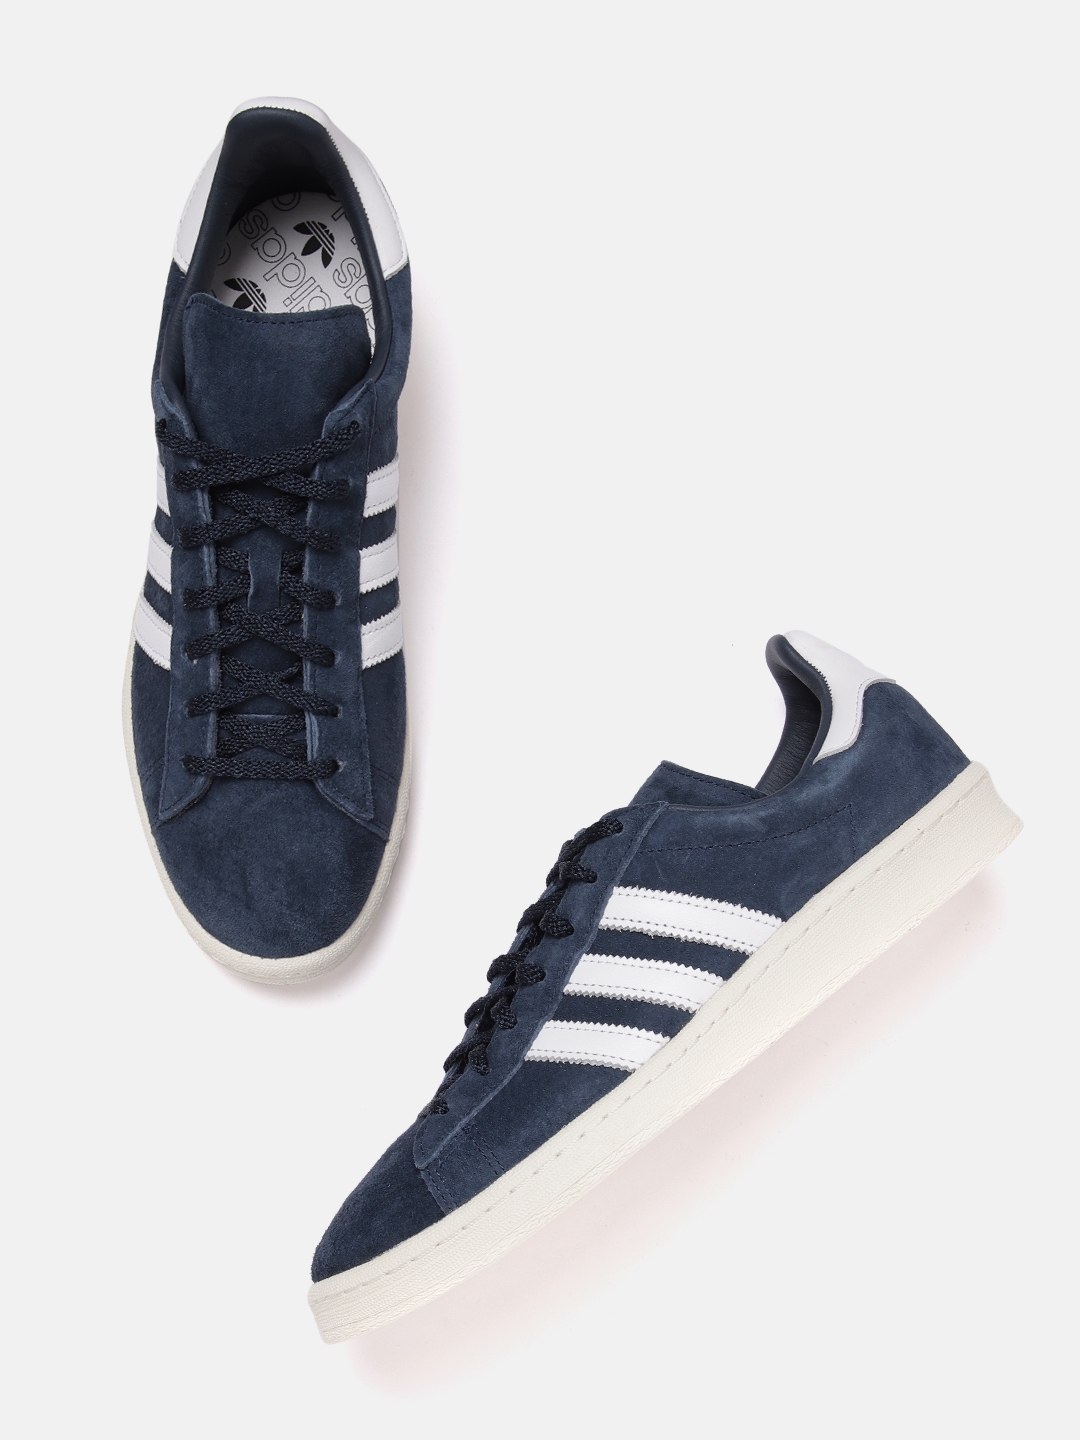 adidas Originals Superstar White Red Navy Men Unisex Classic Casual Shoes  FX2328, Men's Fashion, Footwear, Sneakers on Carousell